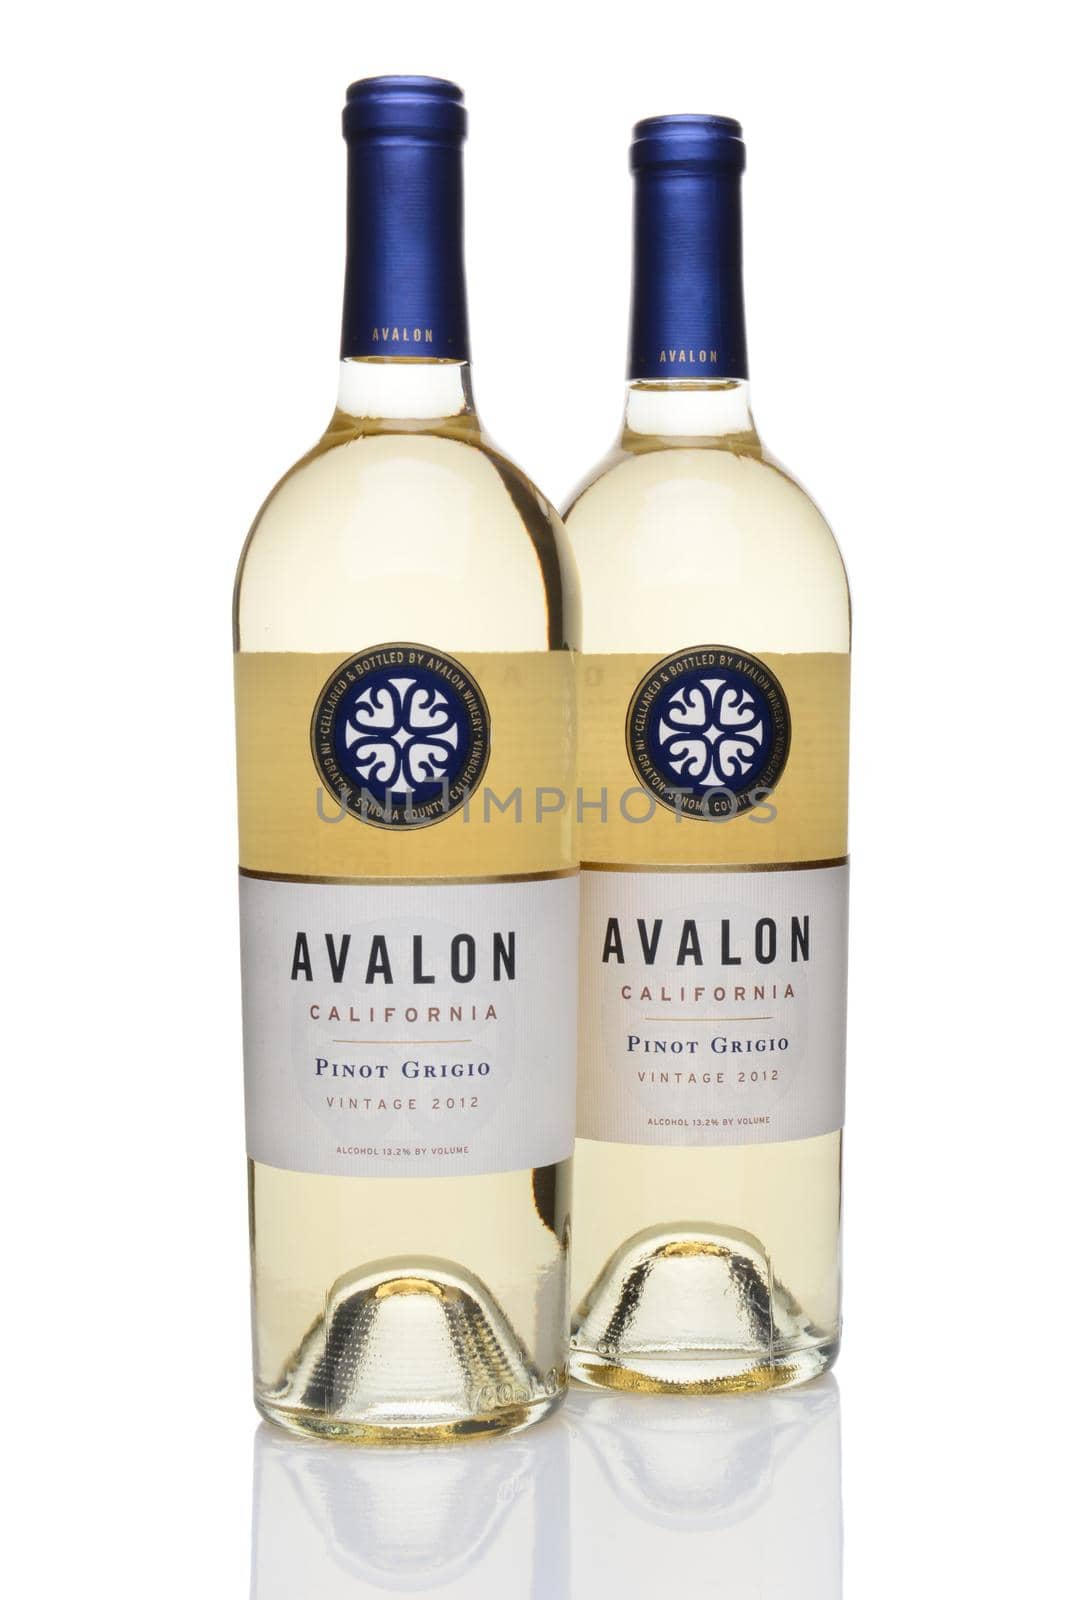 IRVINE, CA - JUNE 23, 2014: Two bottles of Avalon Pinot Grigio Wine. From the Purple Wine Company in Graton, California, Avalon sources it's grapes from premiere vineyards in the state.